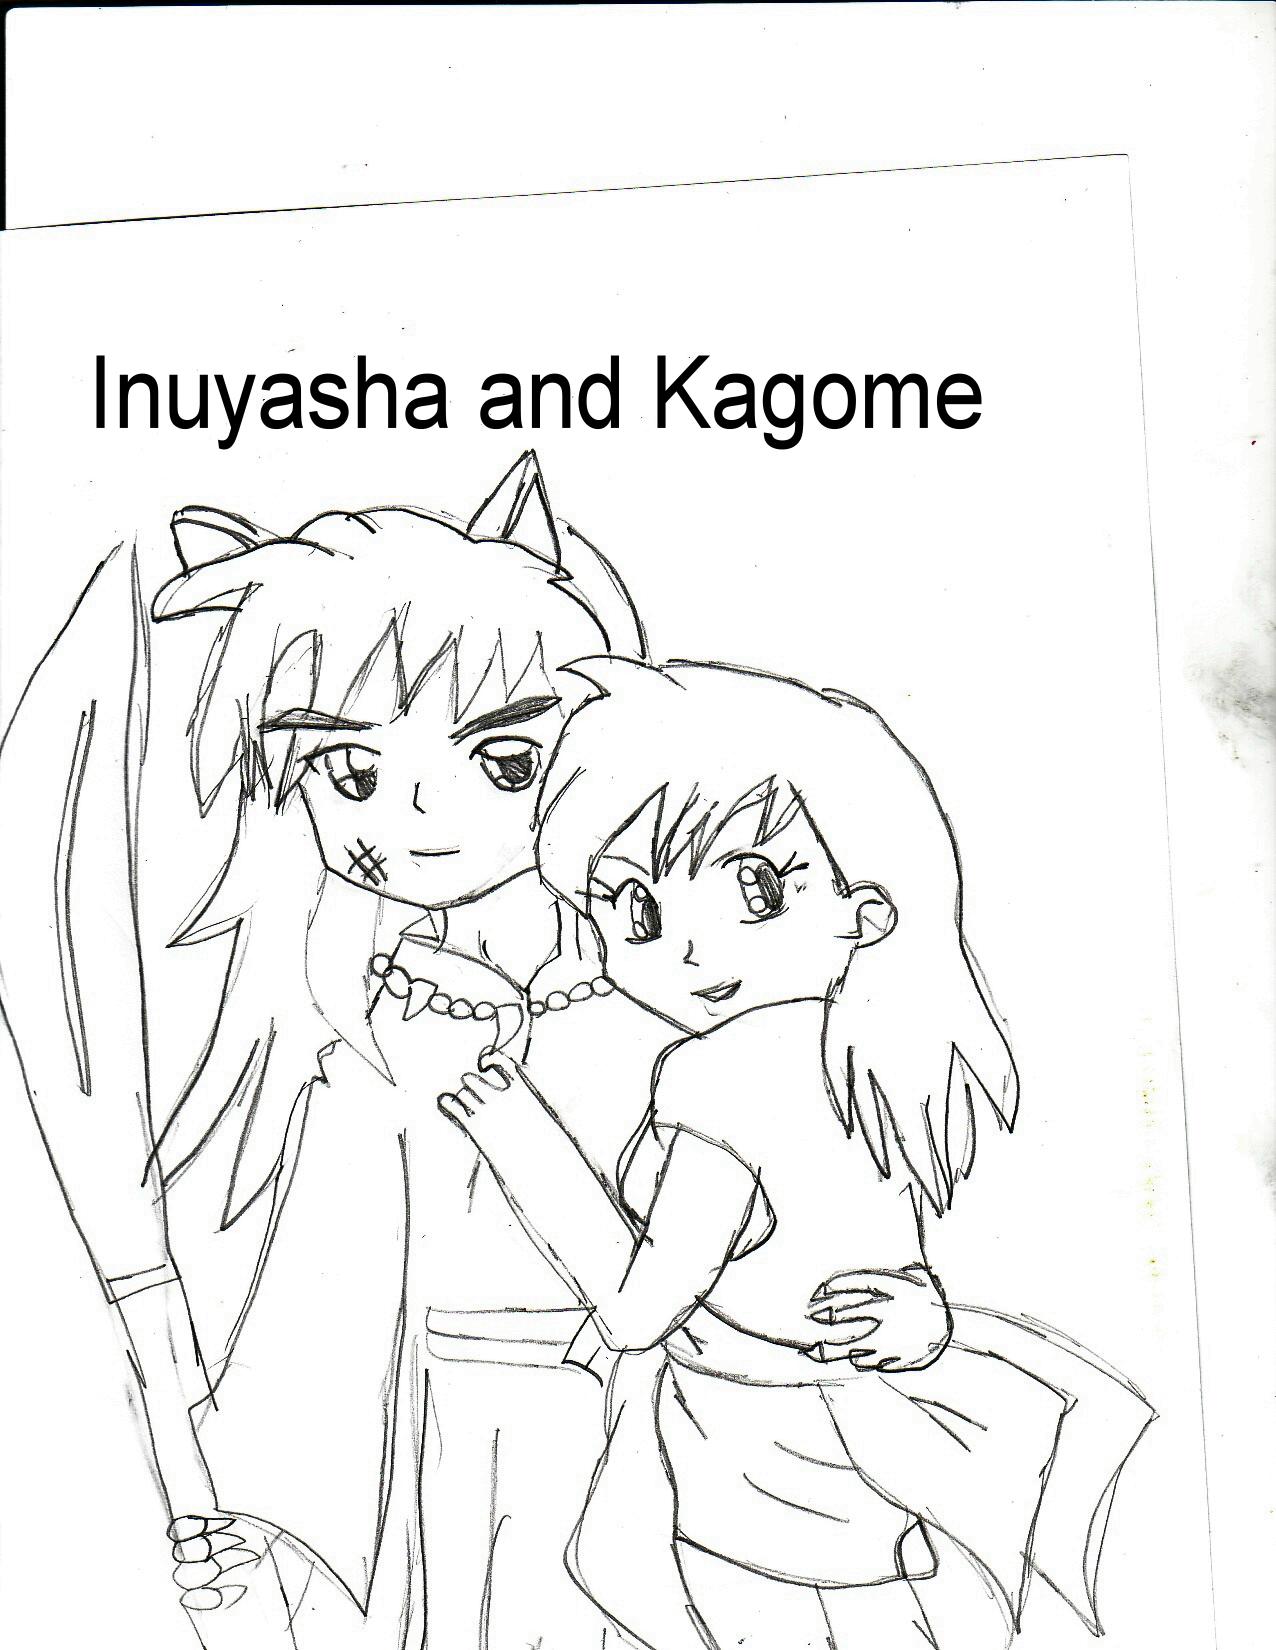 Inuyasha and Kagome by Raylover345678